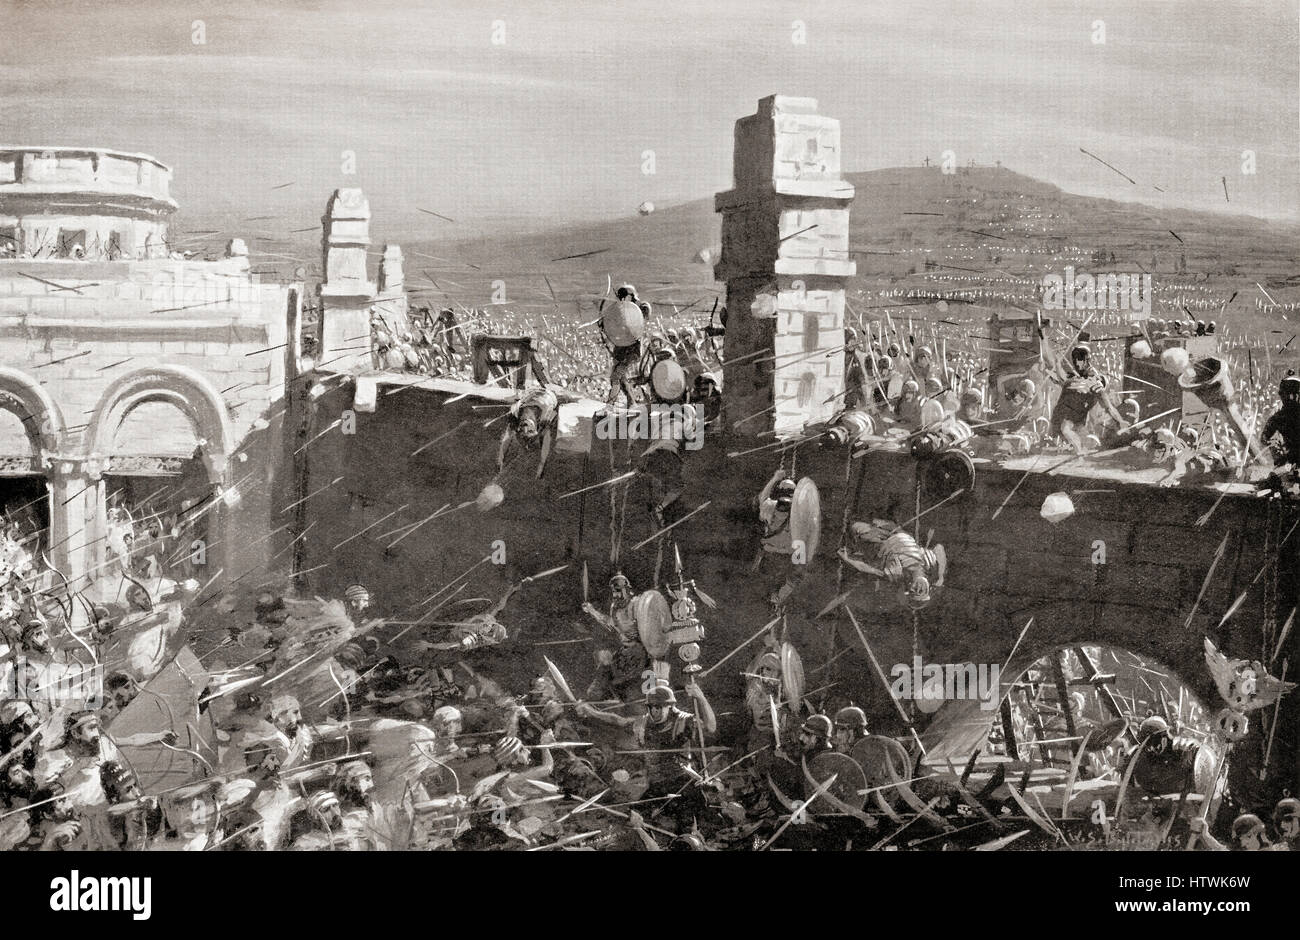 The Siege of Jerusalem, AD70, during the First Jewish–Roman War.   From Hutchinson's History of the Nations, published 1915. Stock Photo